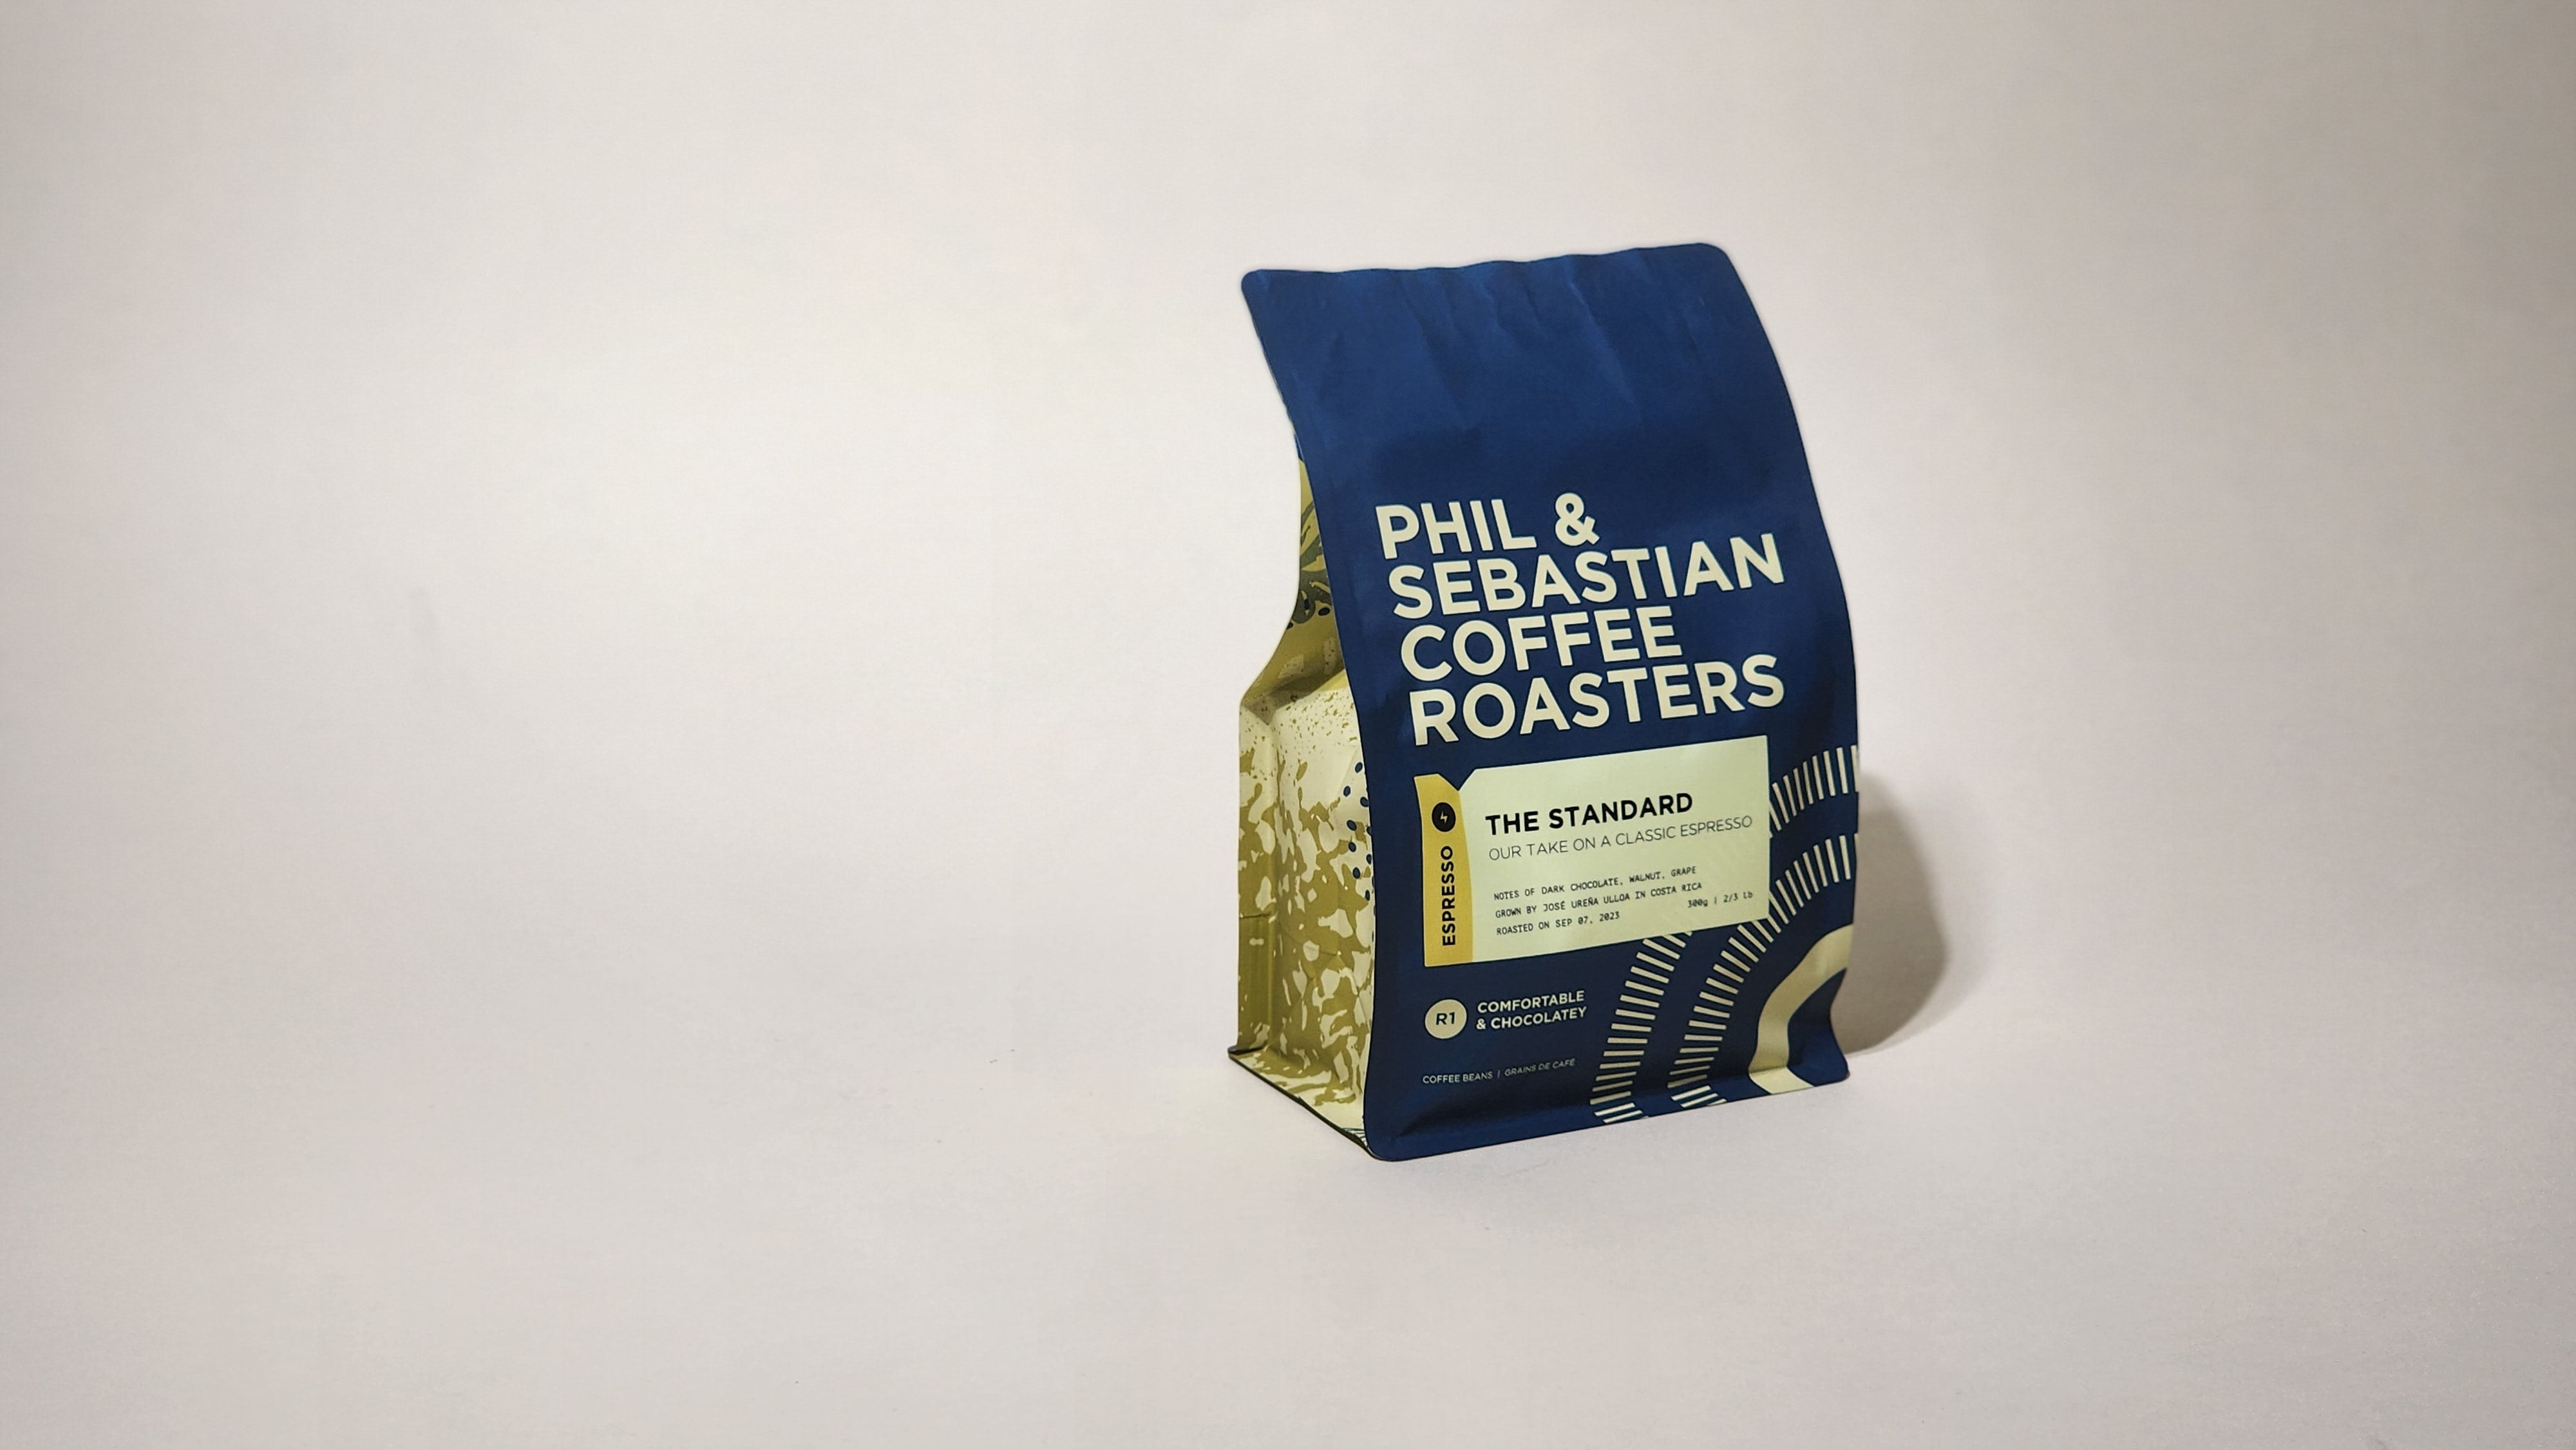 Phil & Sebastian Coffee Roasters' Standard Espresso. Consistent flavor profile with sweet, chocolatey, and nutty notes. Sourced from individual farms and co-ops. Brew with parameters optimized for espresso excellence.